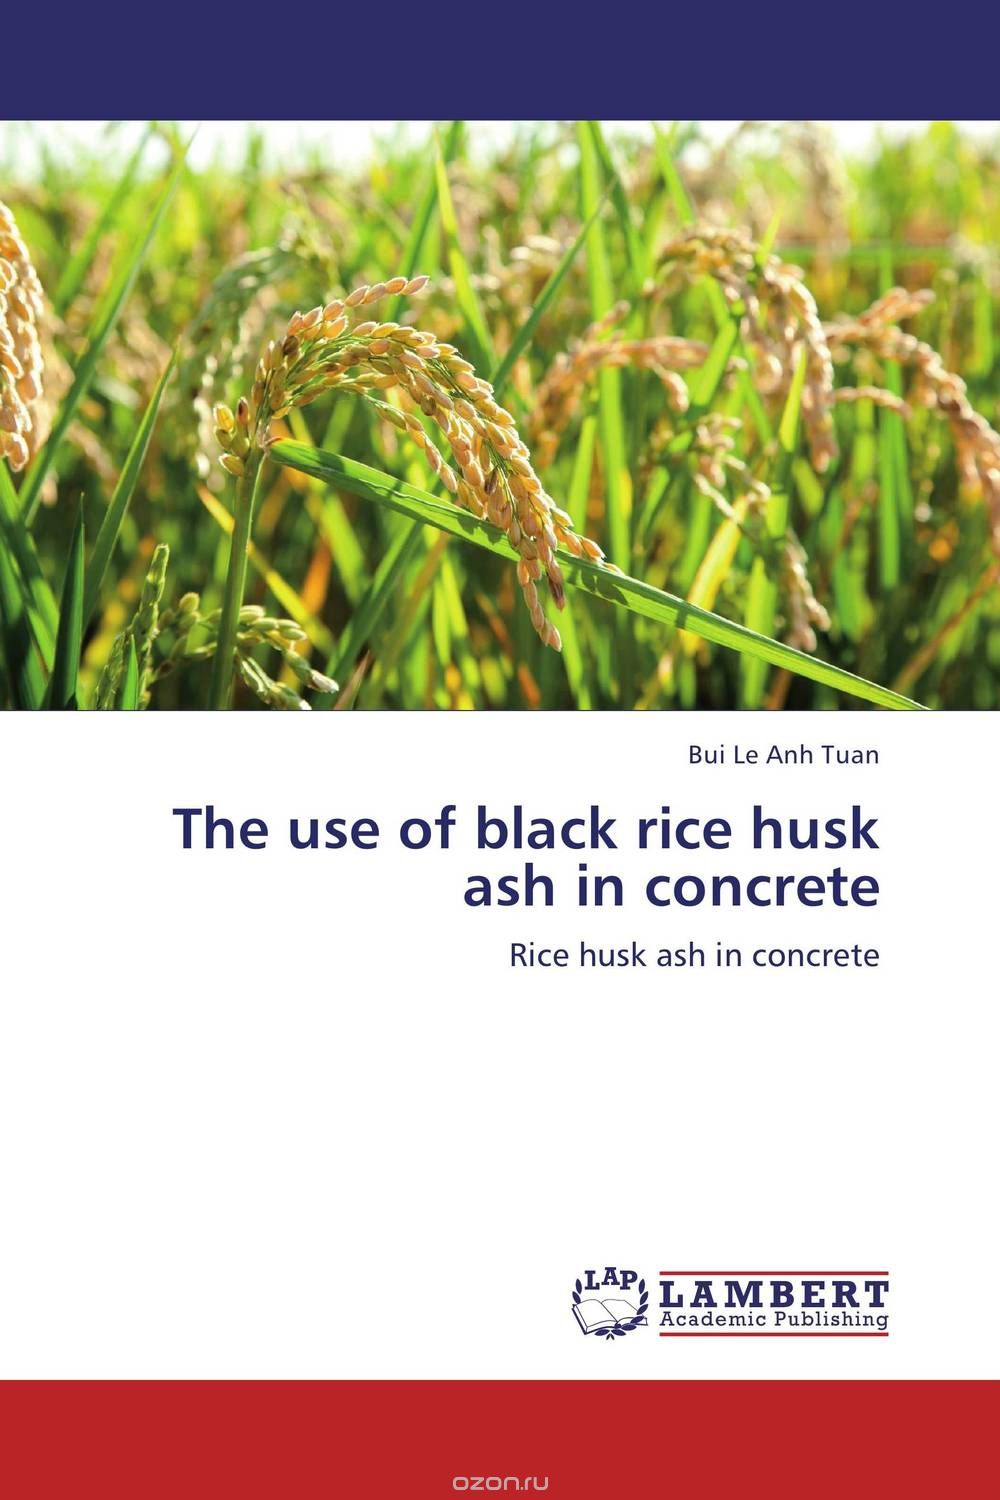 The use of black rice husk ash in concrete